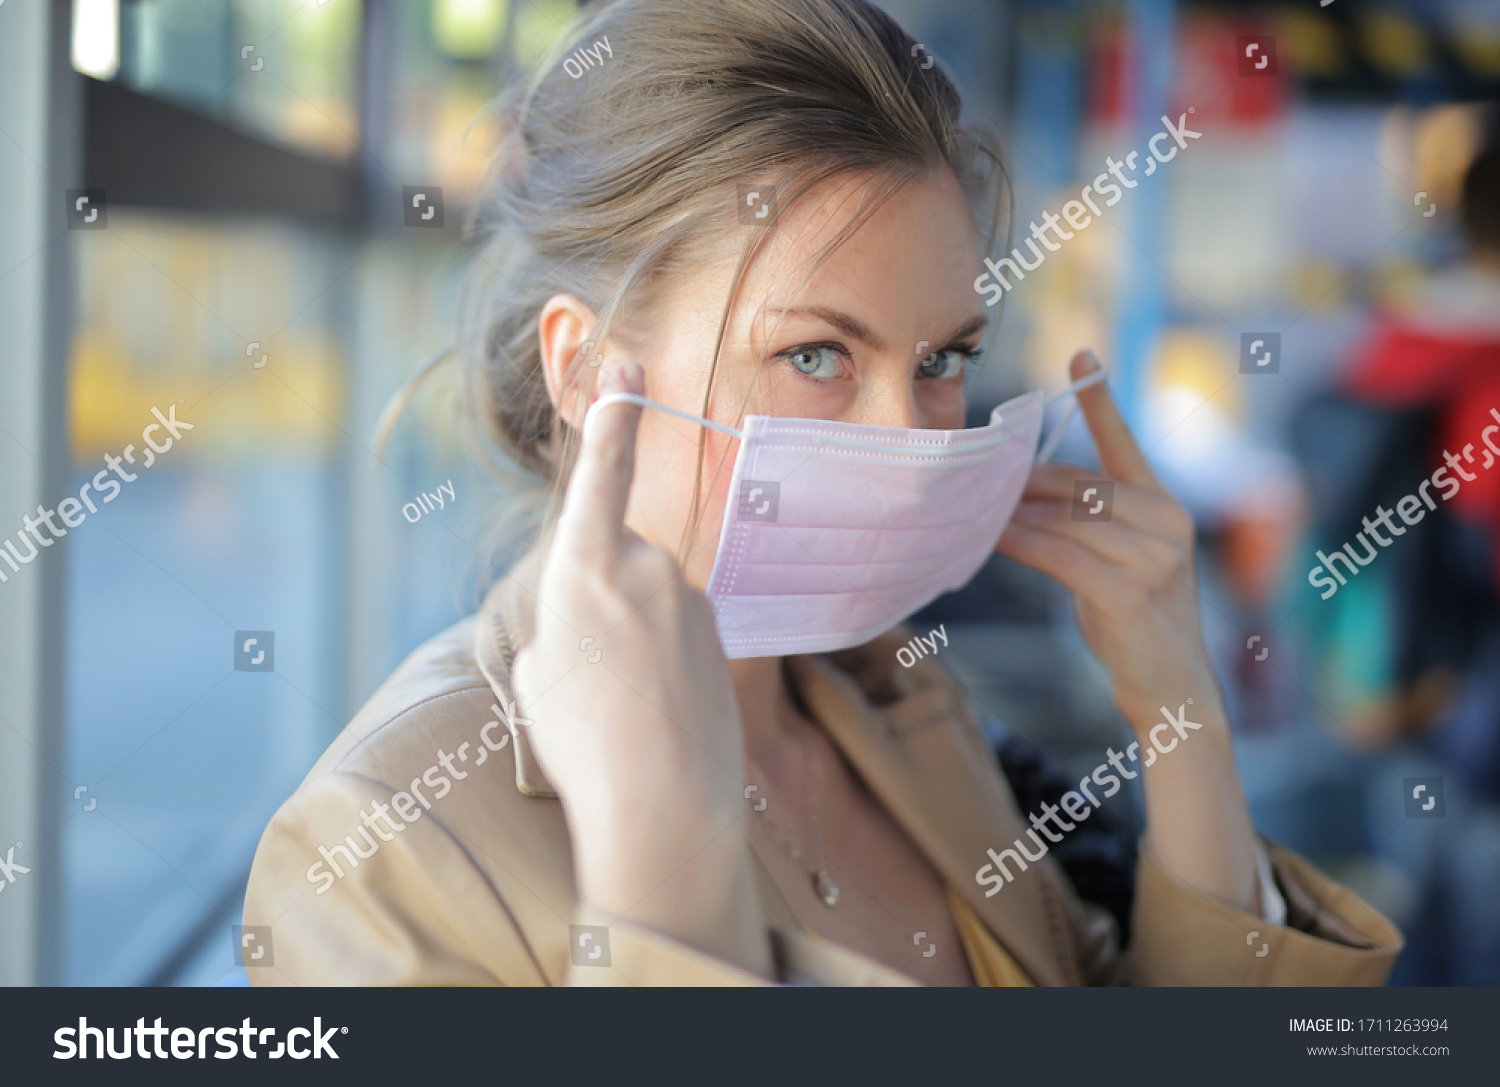 portrait of woman with a mask in a bus #1711263994